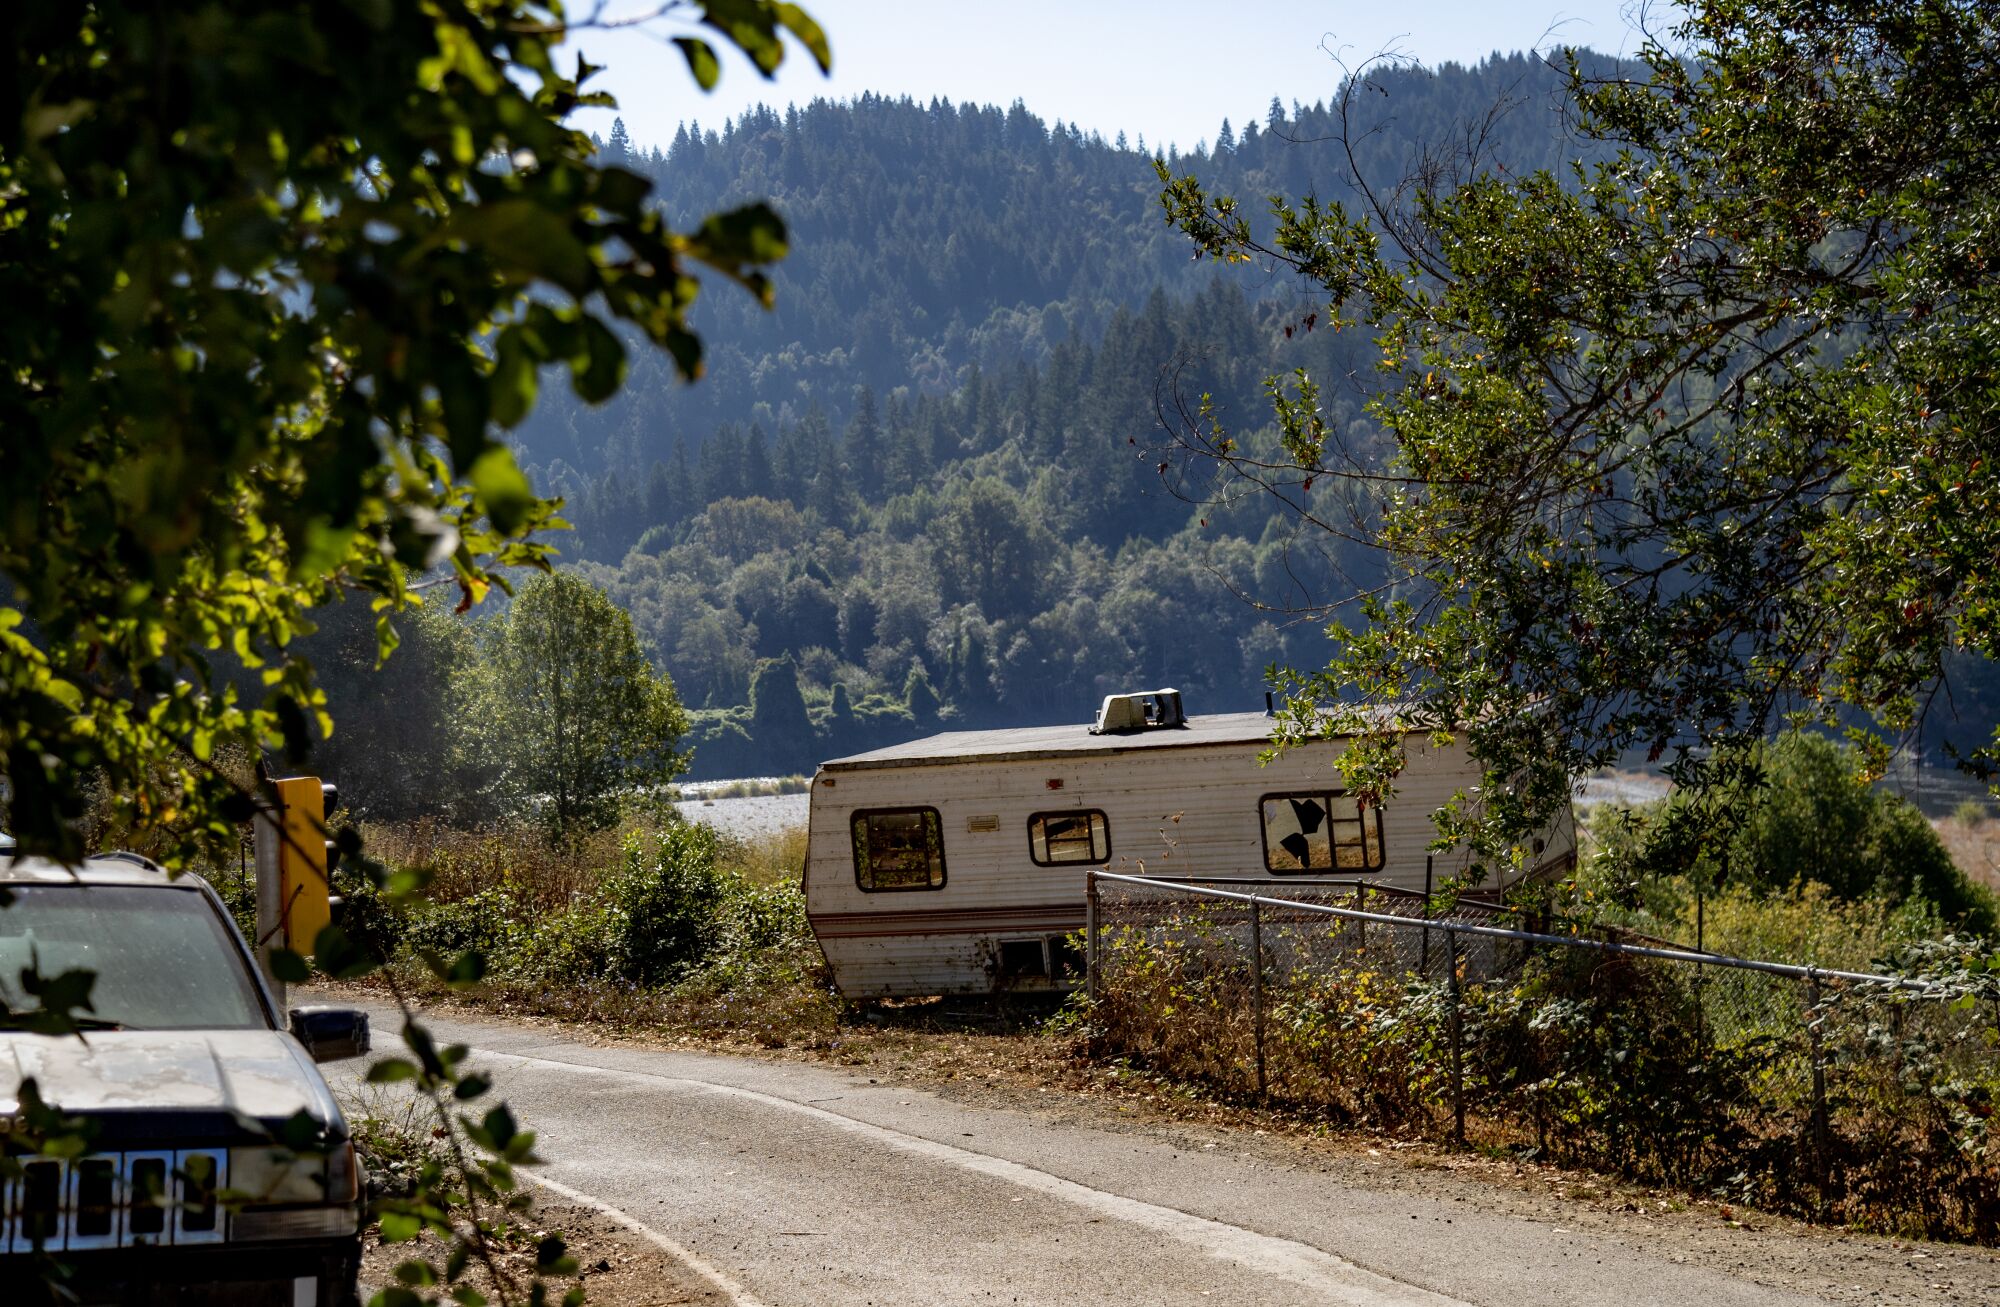 A run-down motor home near a road surrounded by forests.